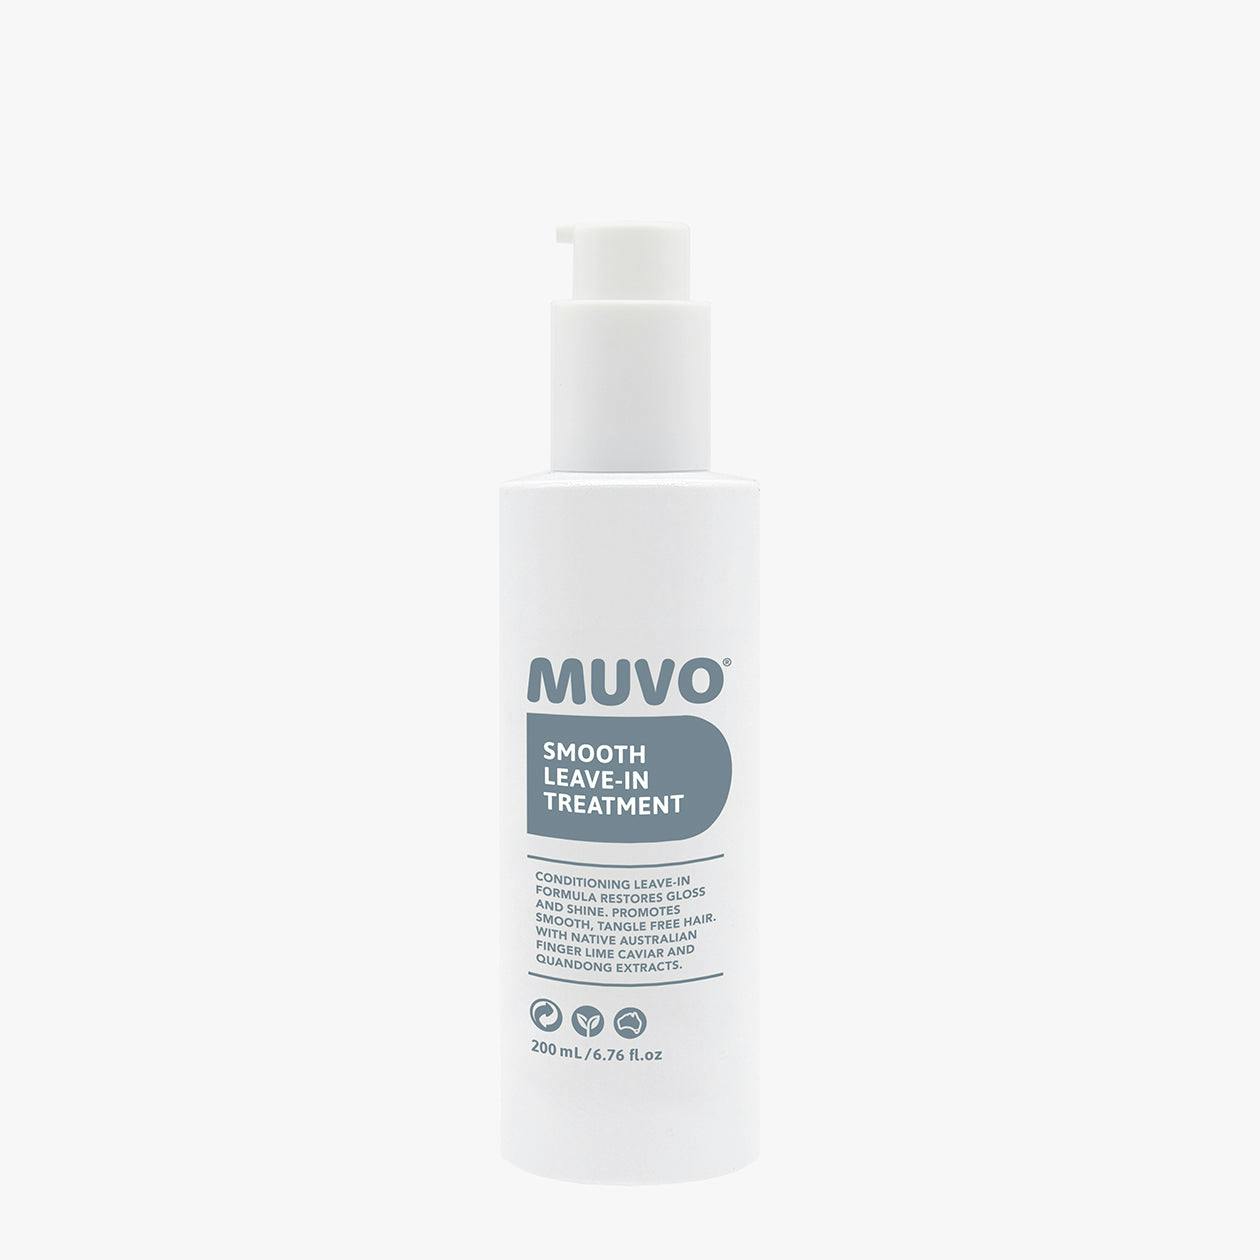 MUVO Smooth Leave-in Treatment 200ml